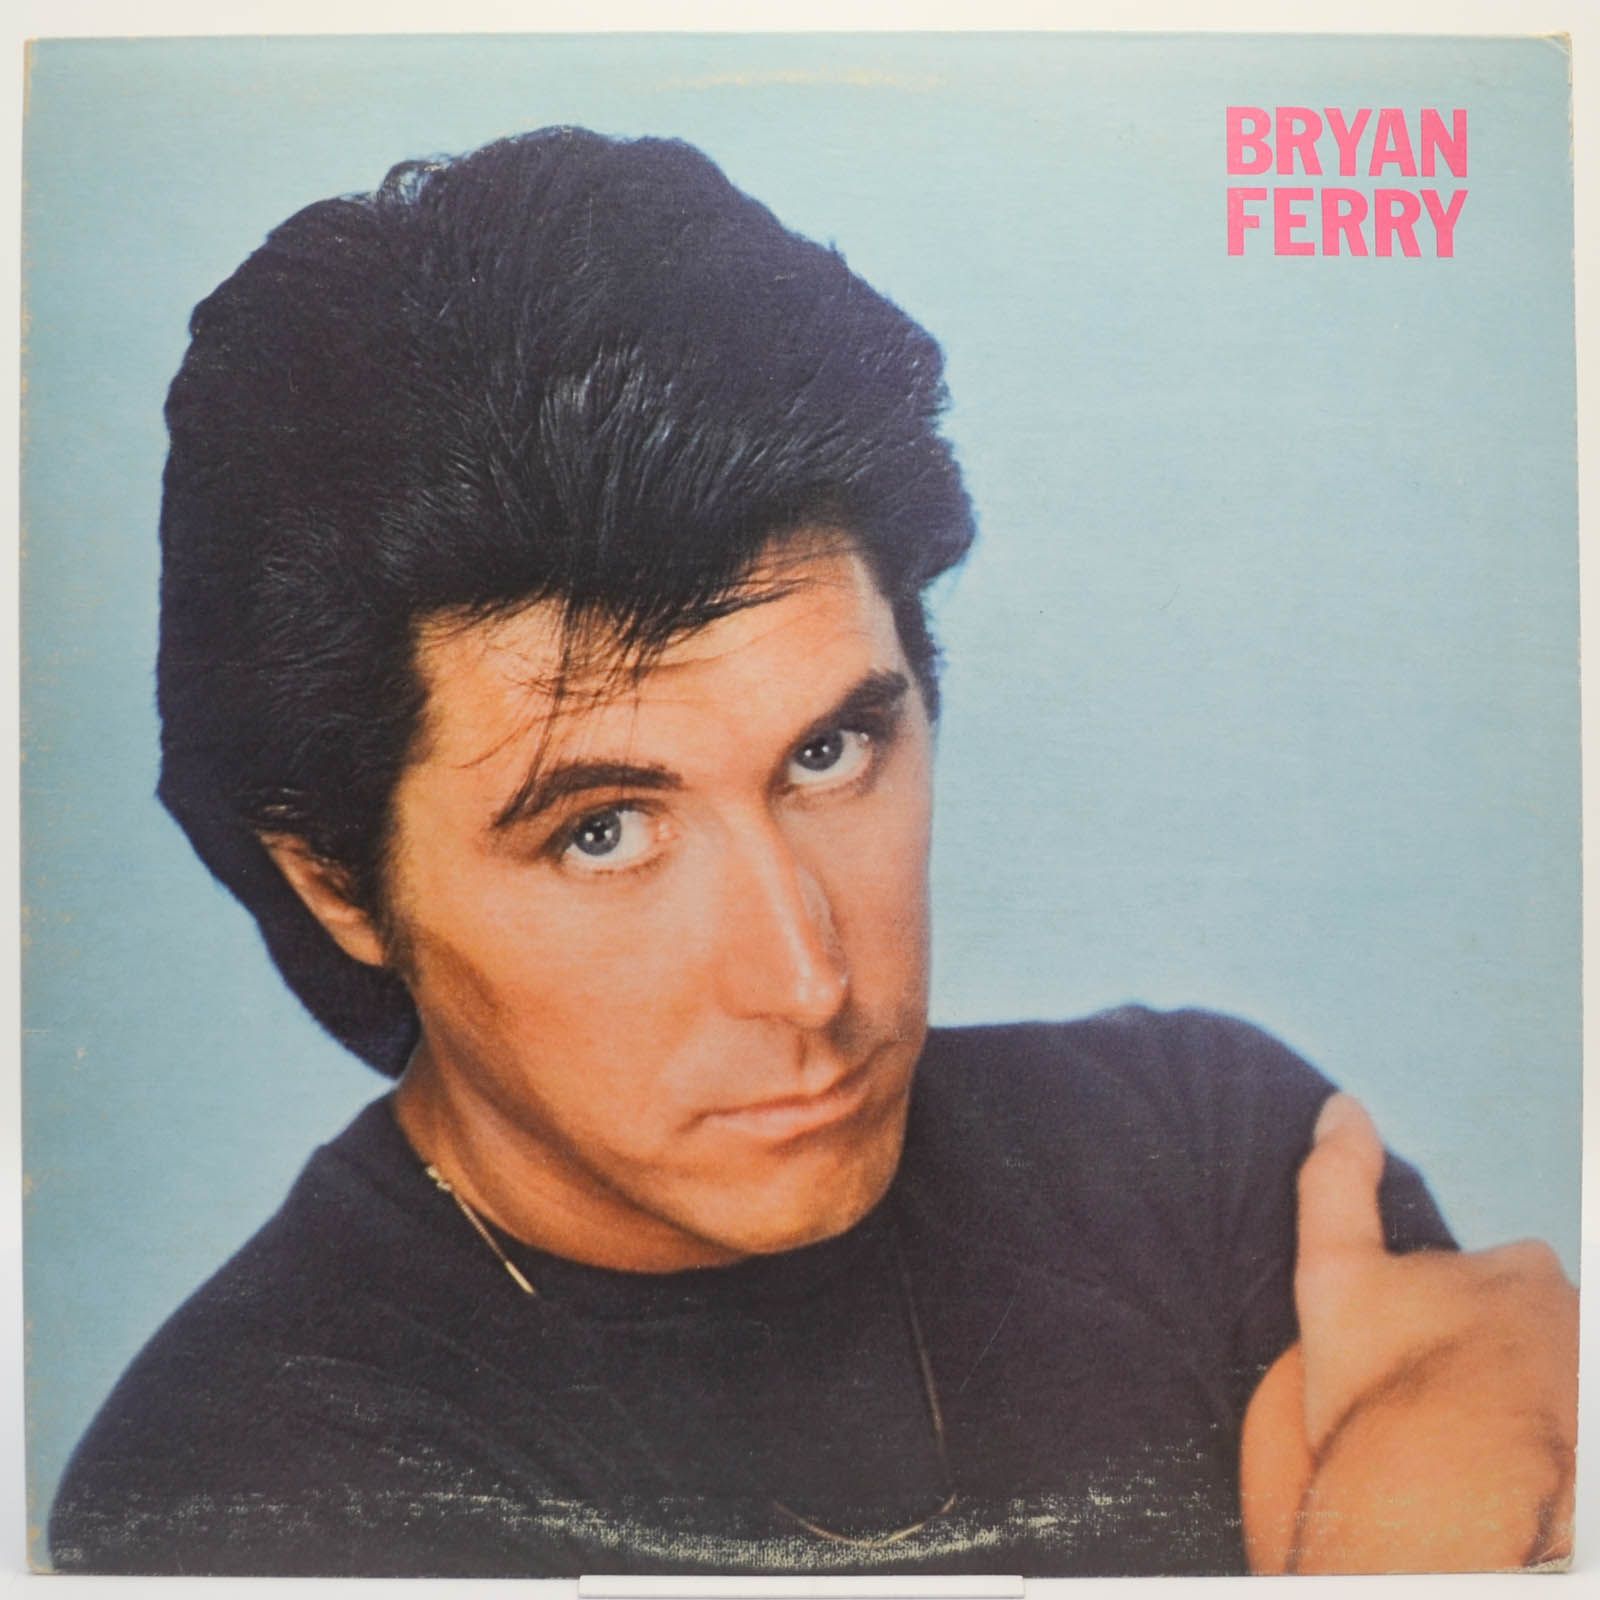 Bryan Ferry — These Foolish Things, 1974